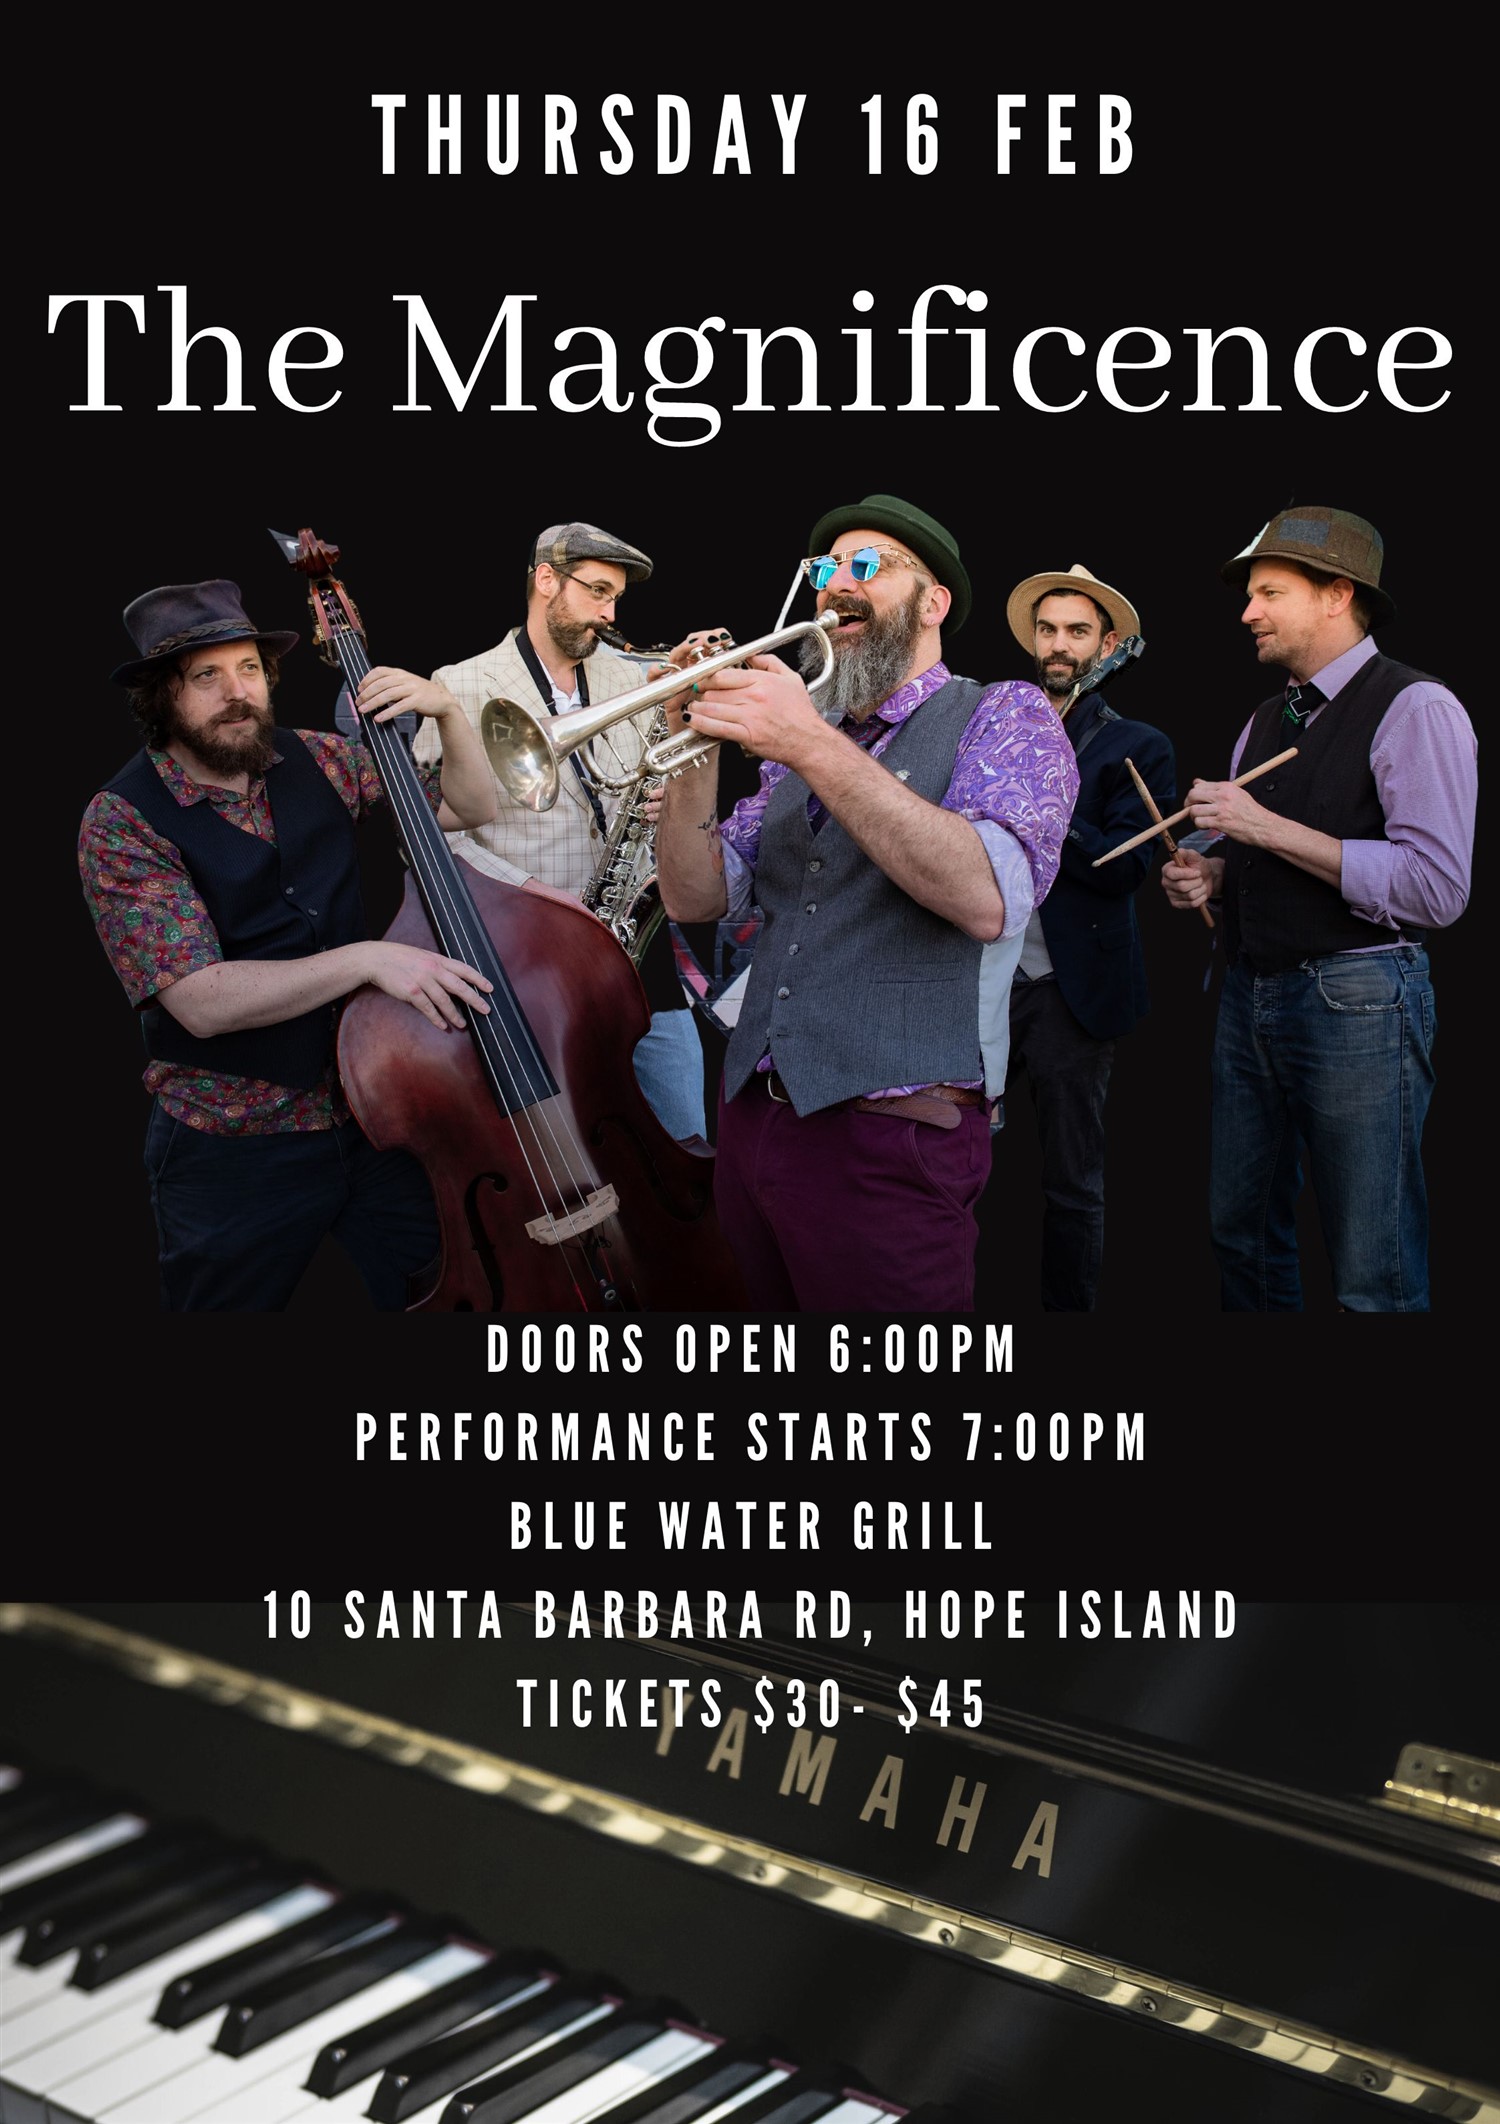 The Magnificence  on Feb 16, 18:00@Hope Island Jazz - Blue Water Grill - Buy tickets and Get information on Hope Island Jazz hopeislandjazz.com.au